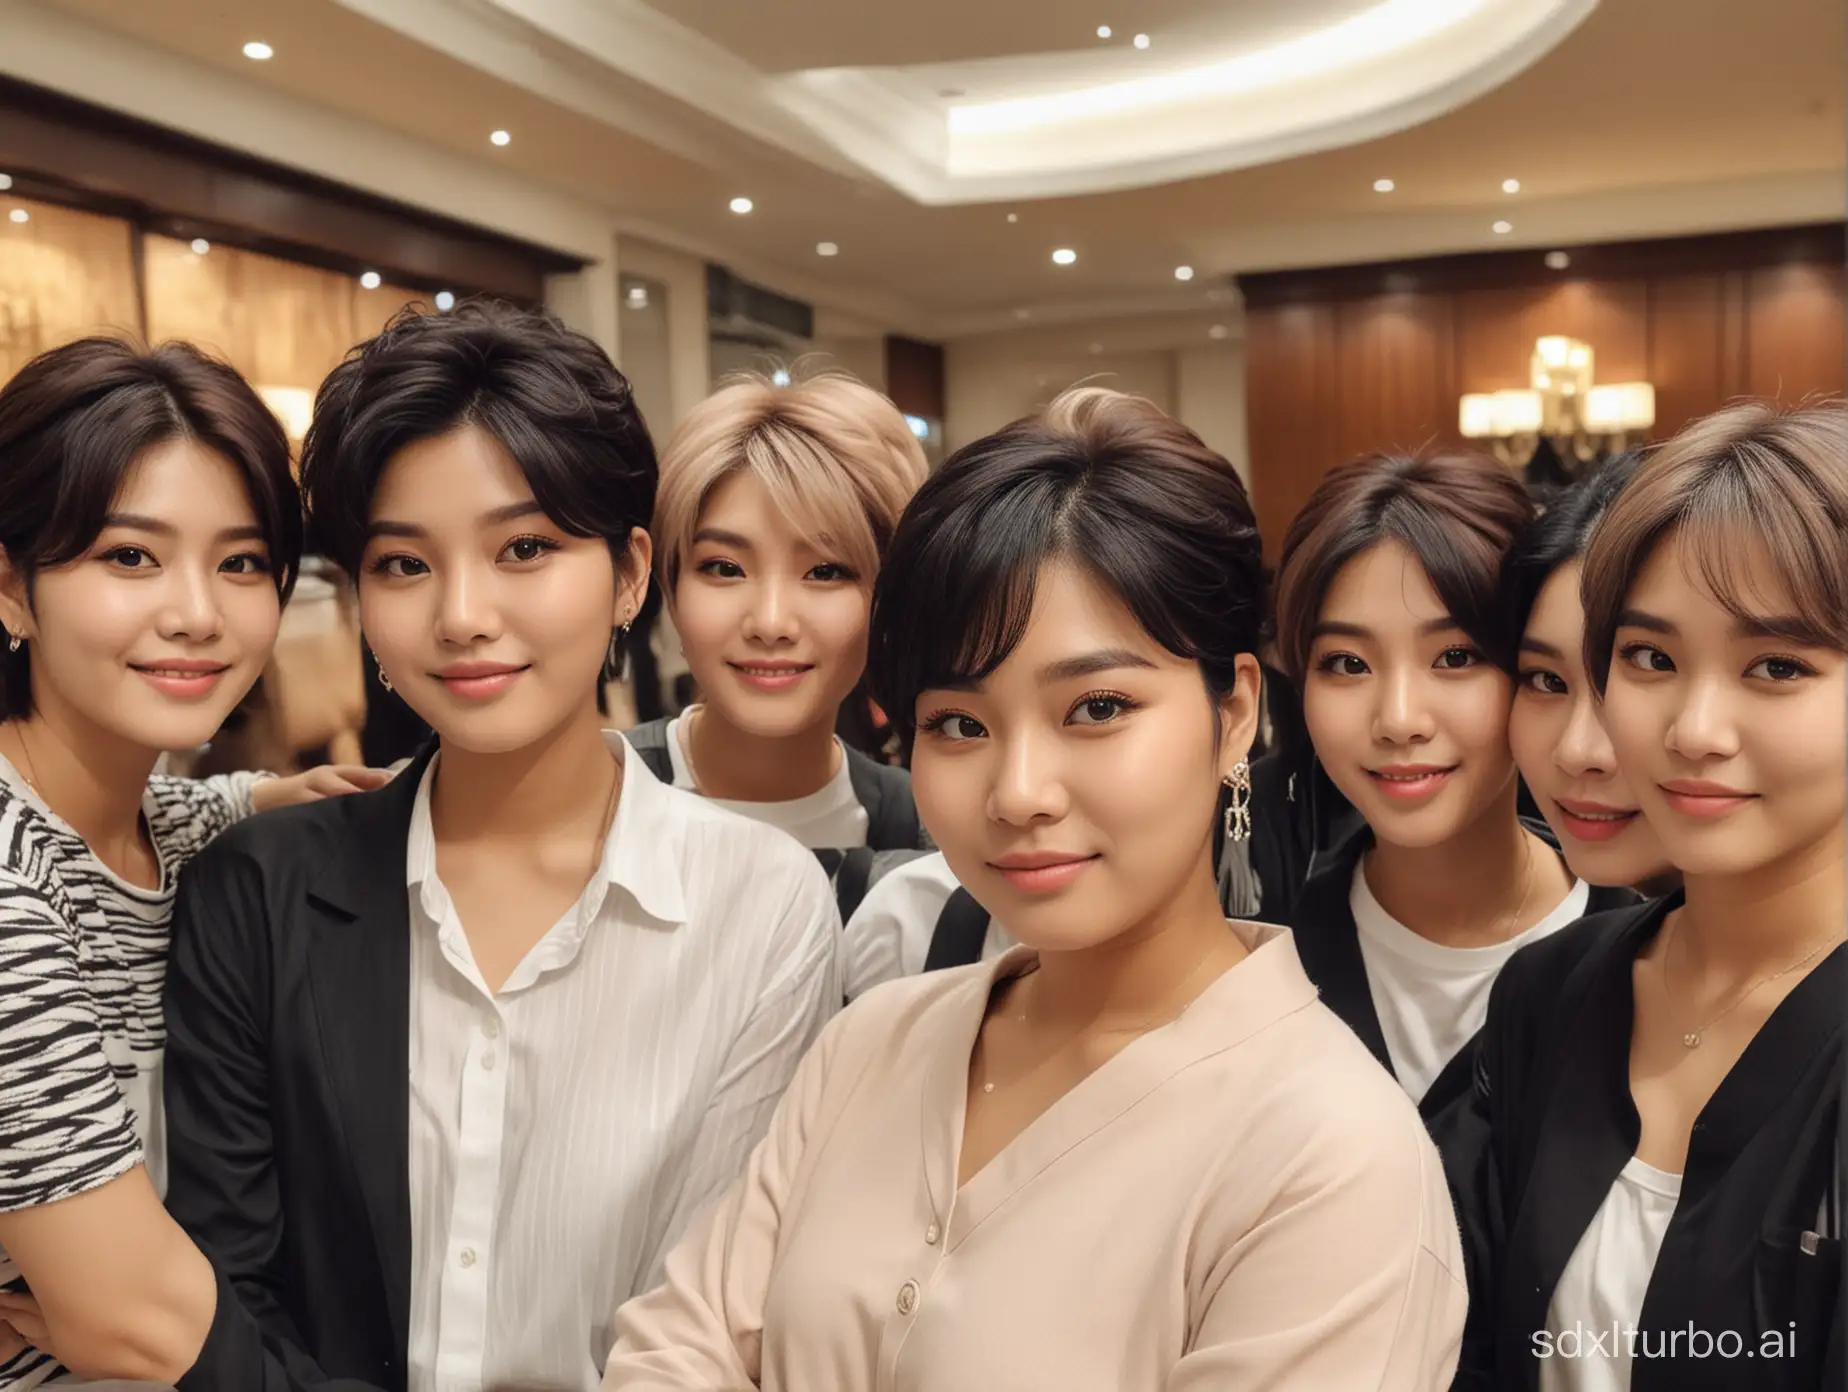 Create a picture where Indonesian women 50 years old, chubby, short body, brown skin, Grown Out Pixie black hair talks to a students, hotel lobby background. The students is BTS Korean Group Band Member.